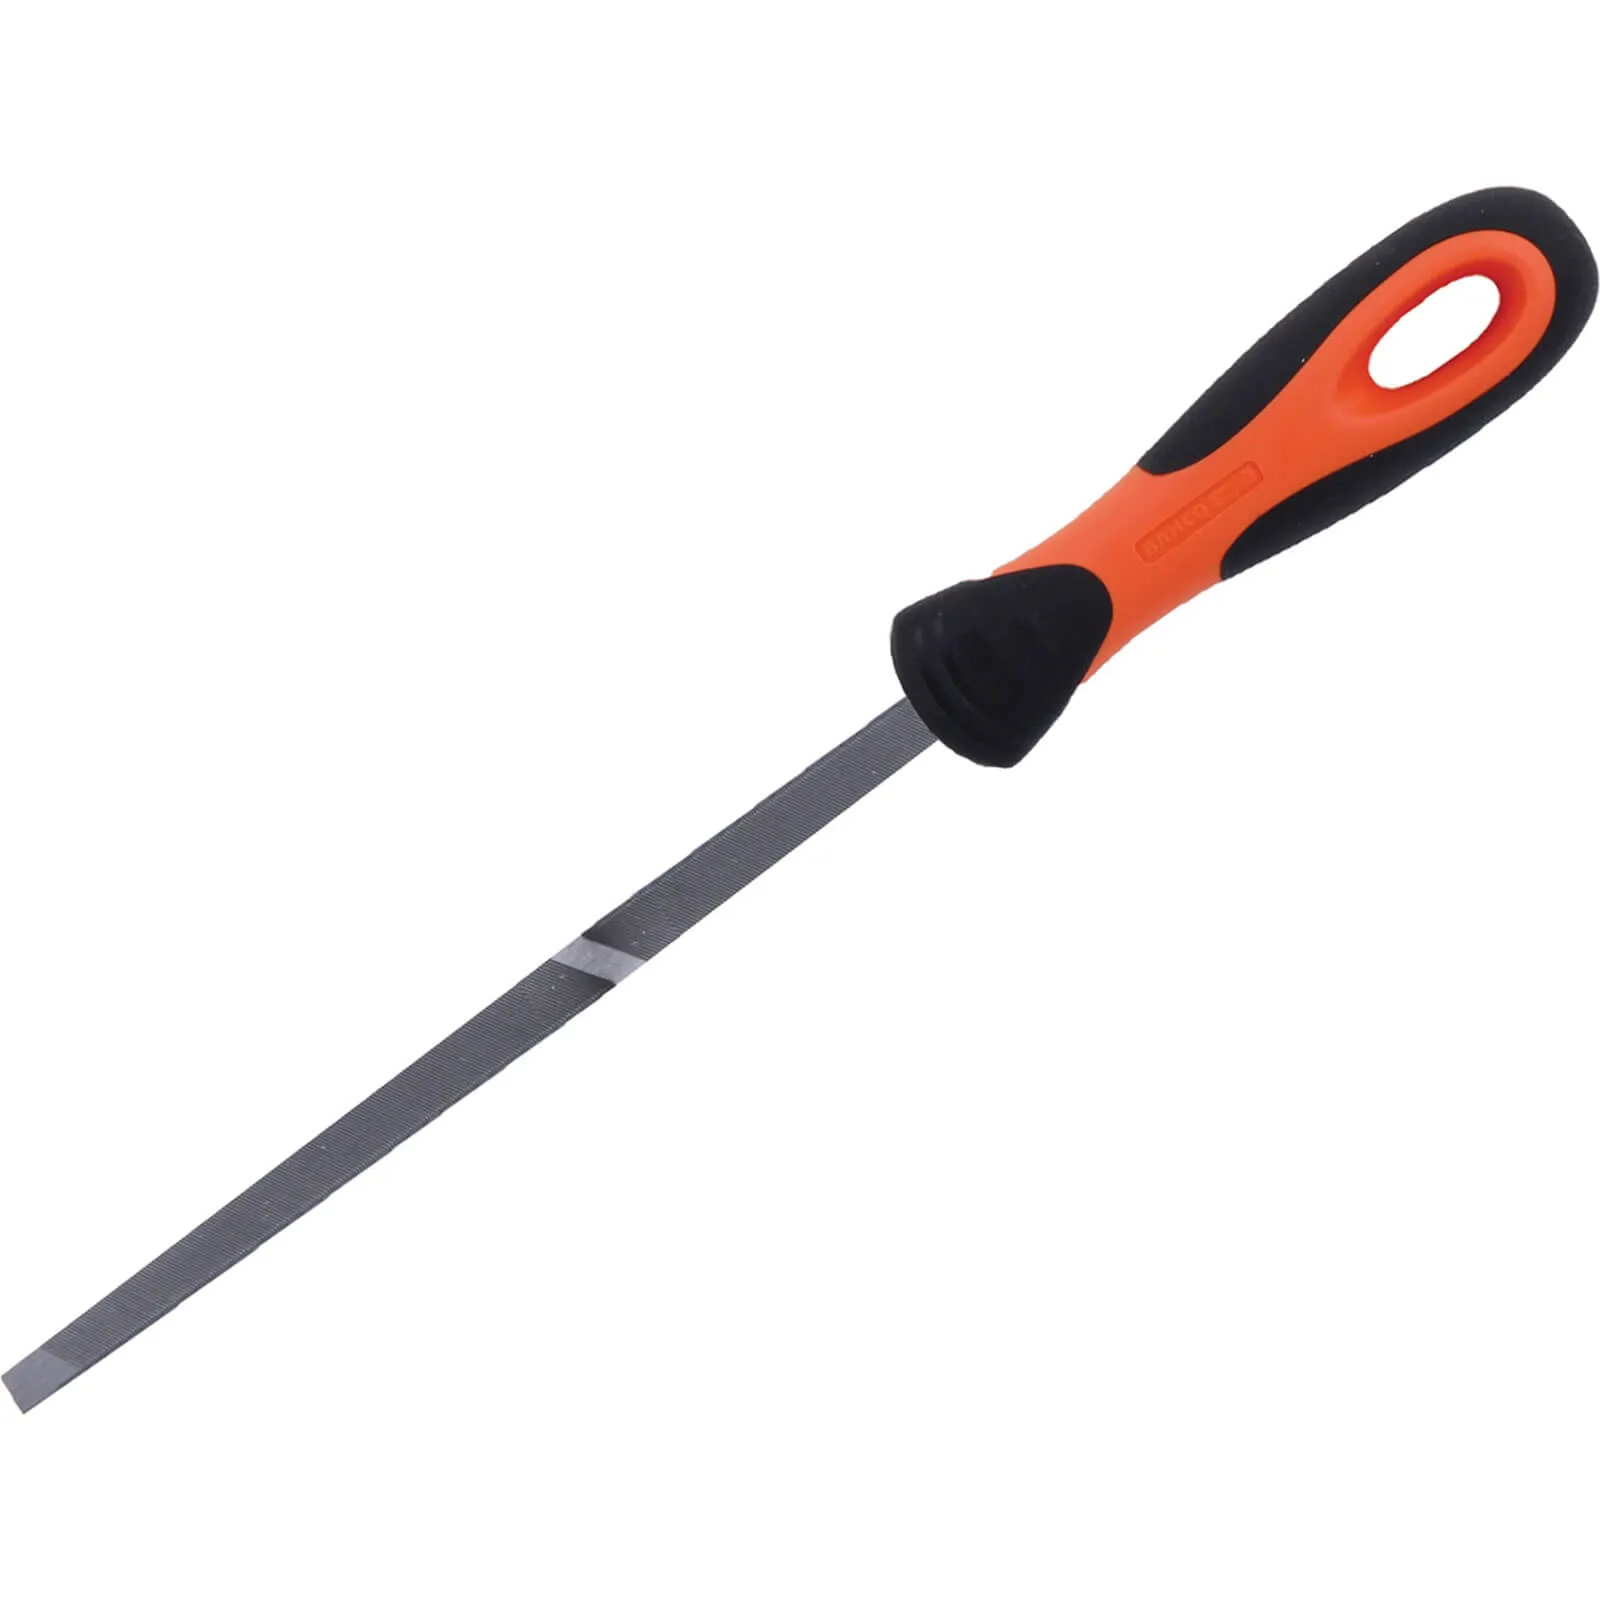 Bahco Ergo Double Ended Hand Saw File - 7" / 175mm, Second (Medium)